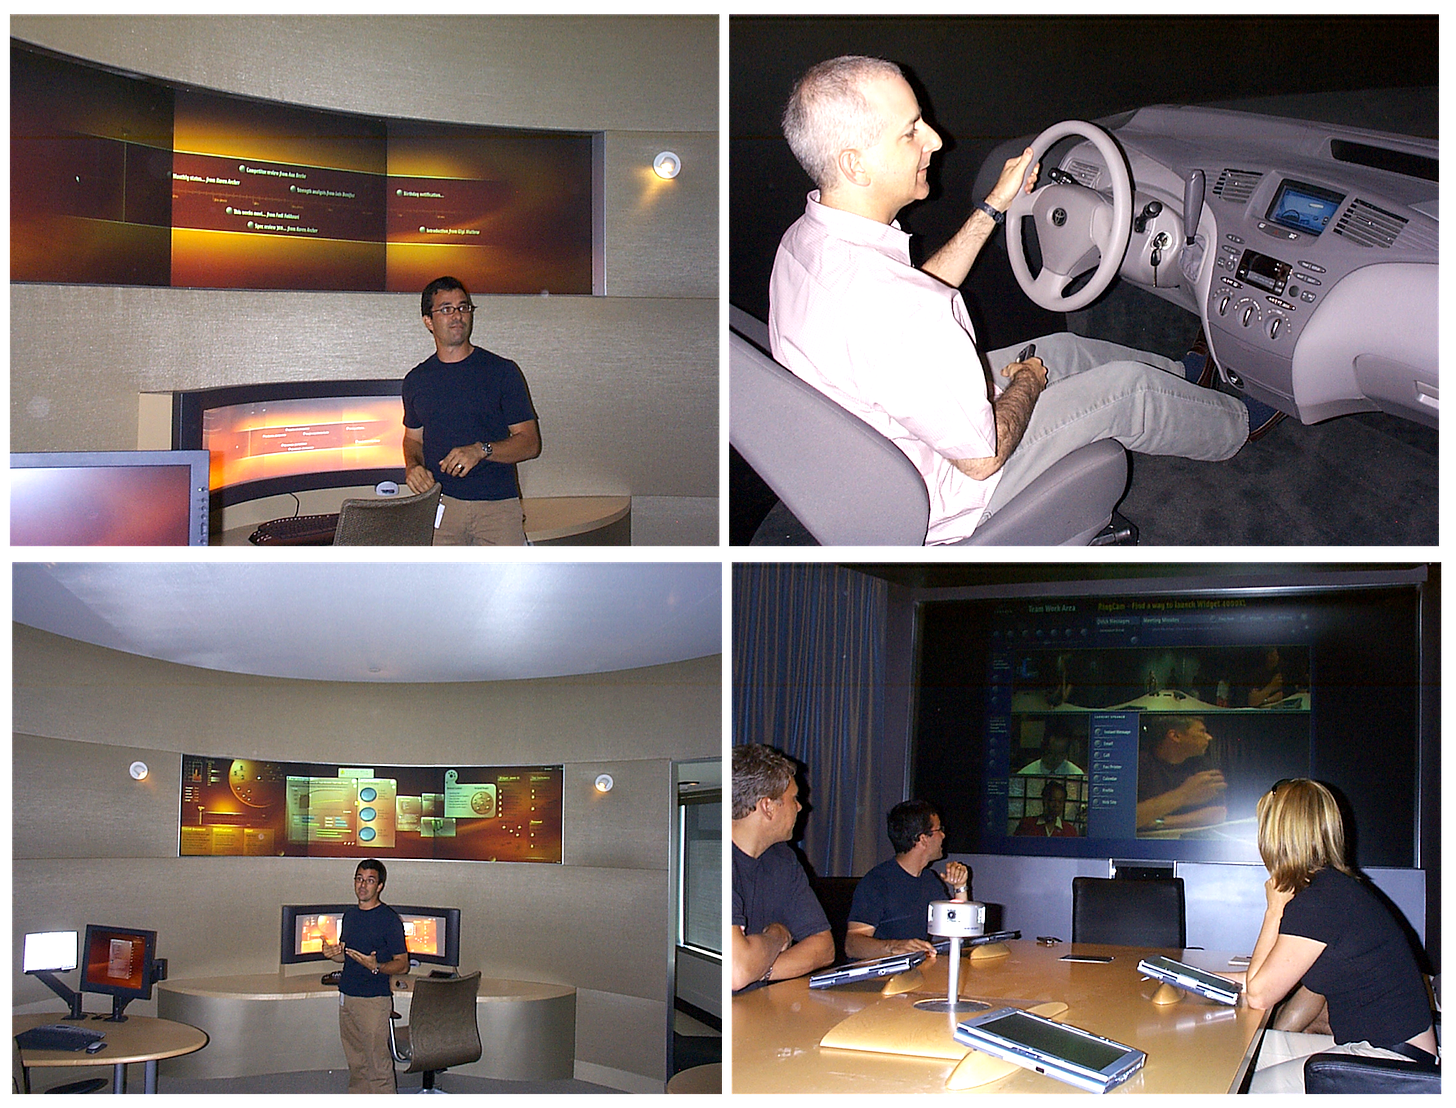 four photos. one of the curved displays, one of the car dashboard, one of a far shot of the curved displays, and one of people sitting at the conference table with ring cam) - all the center for information work.